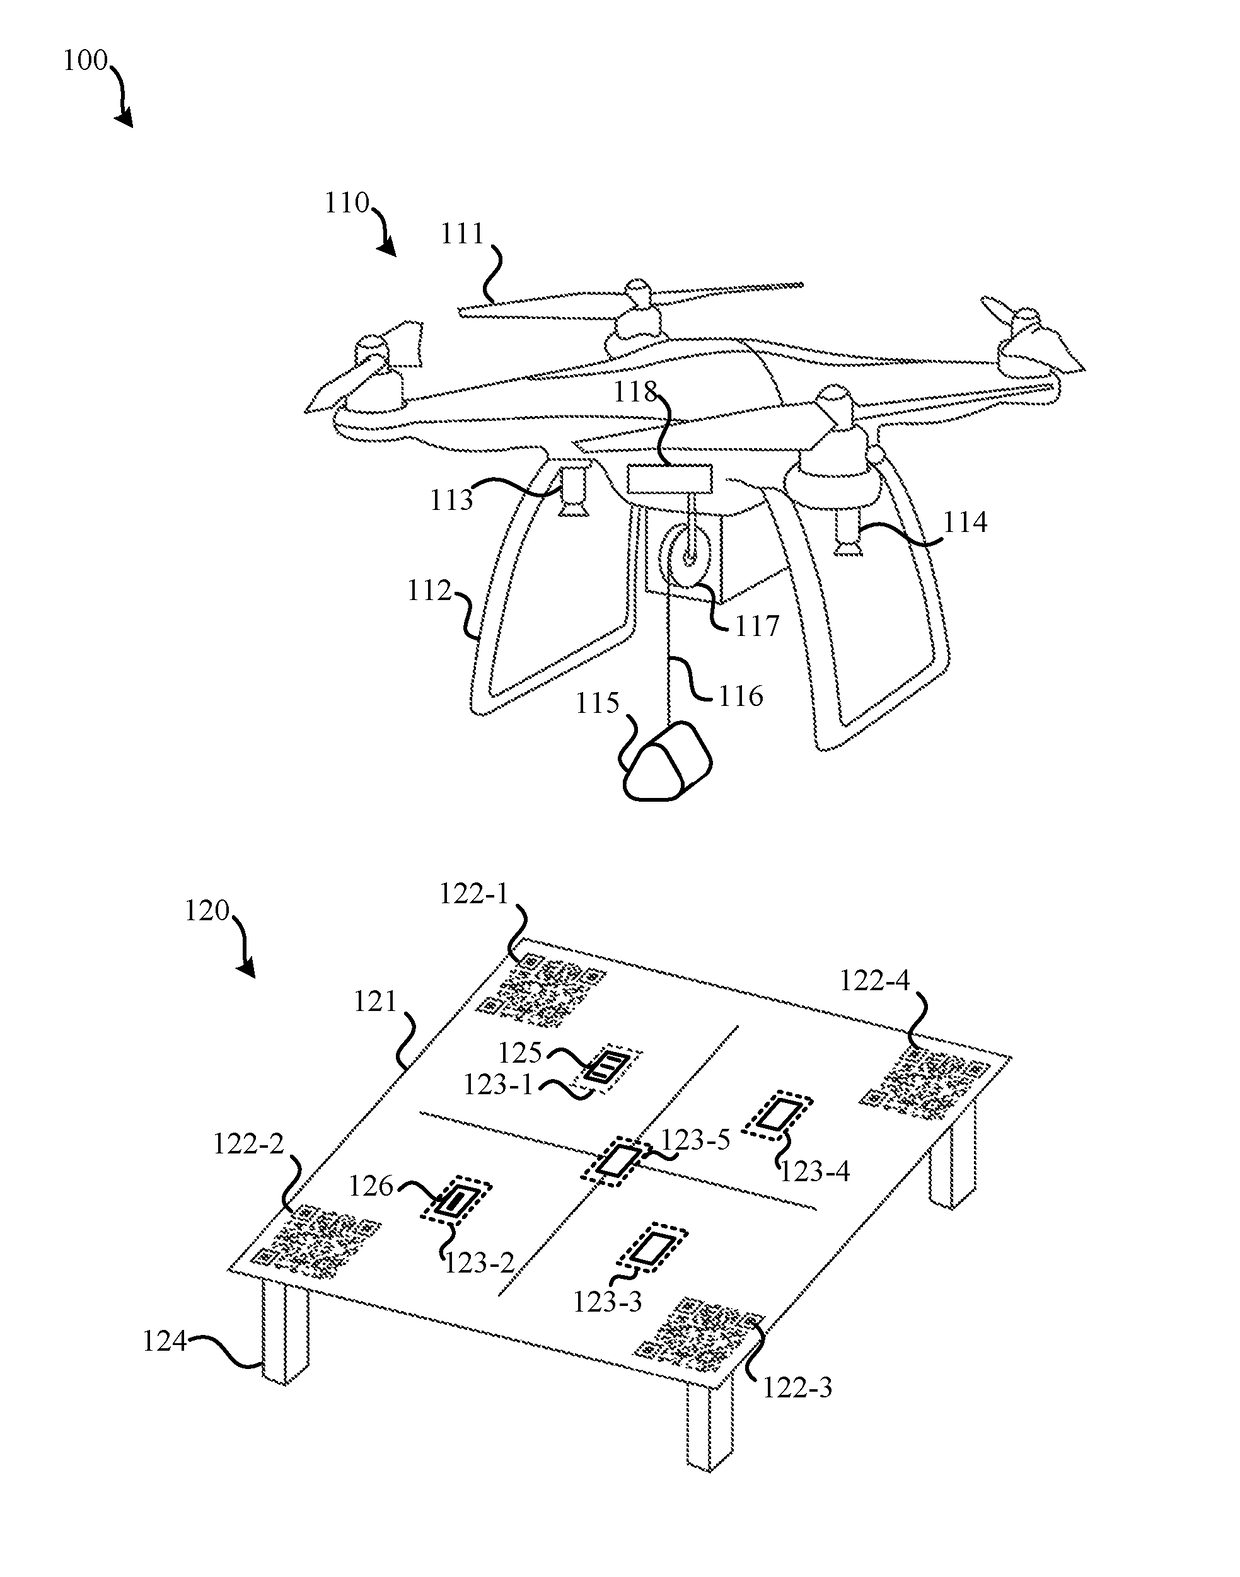 Midair Tethering of an Unmanned Aerial Vehicle with a Docking Station